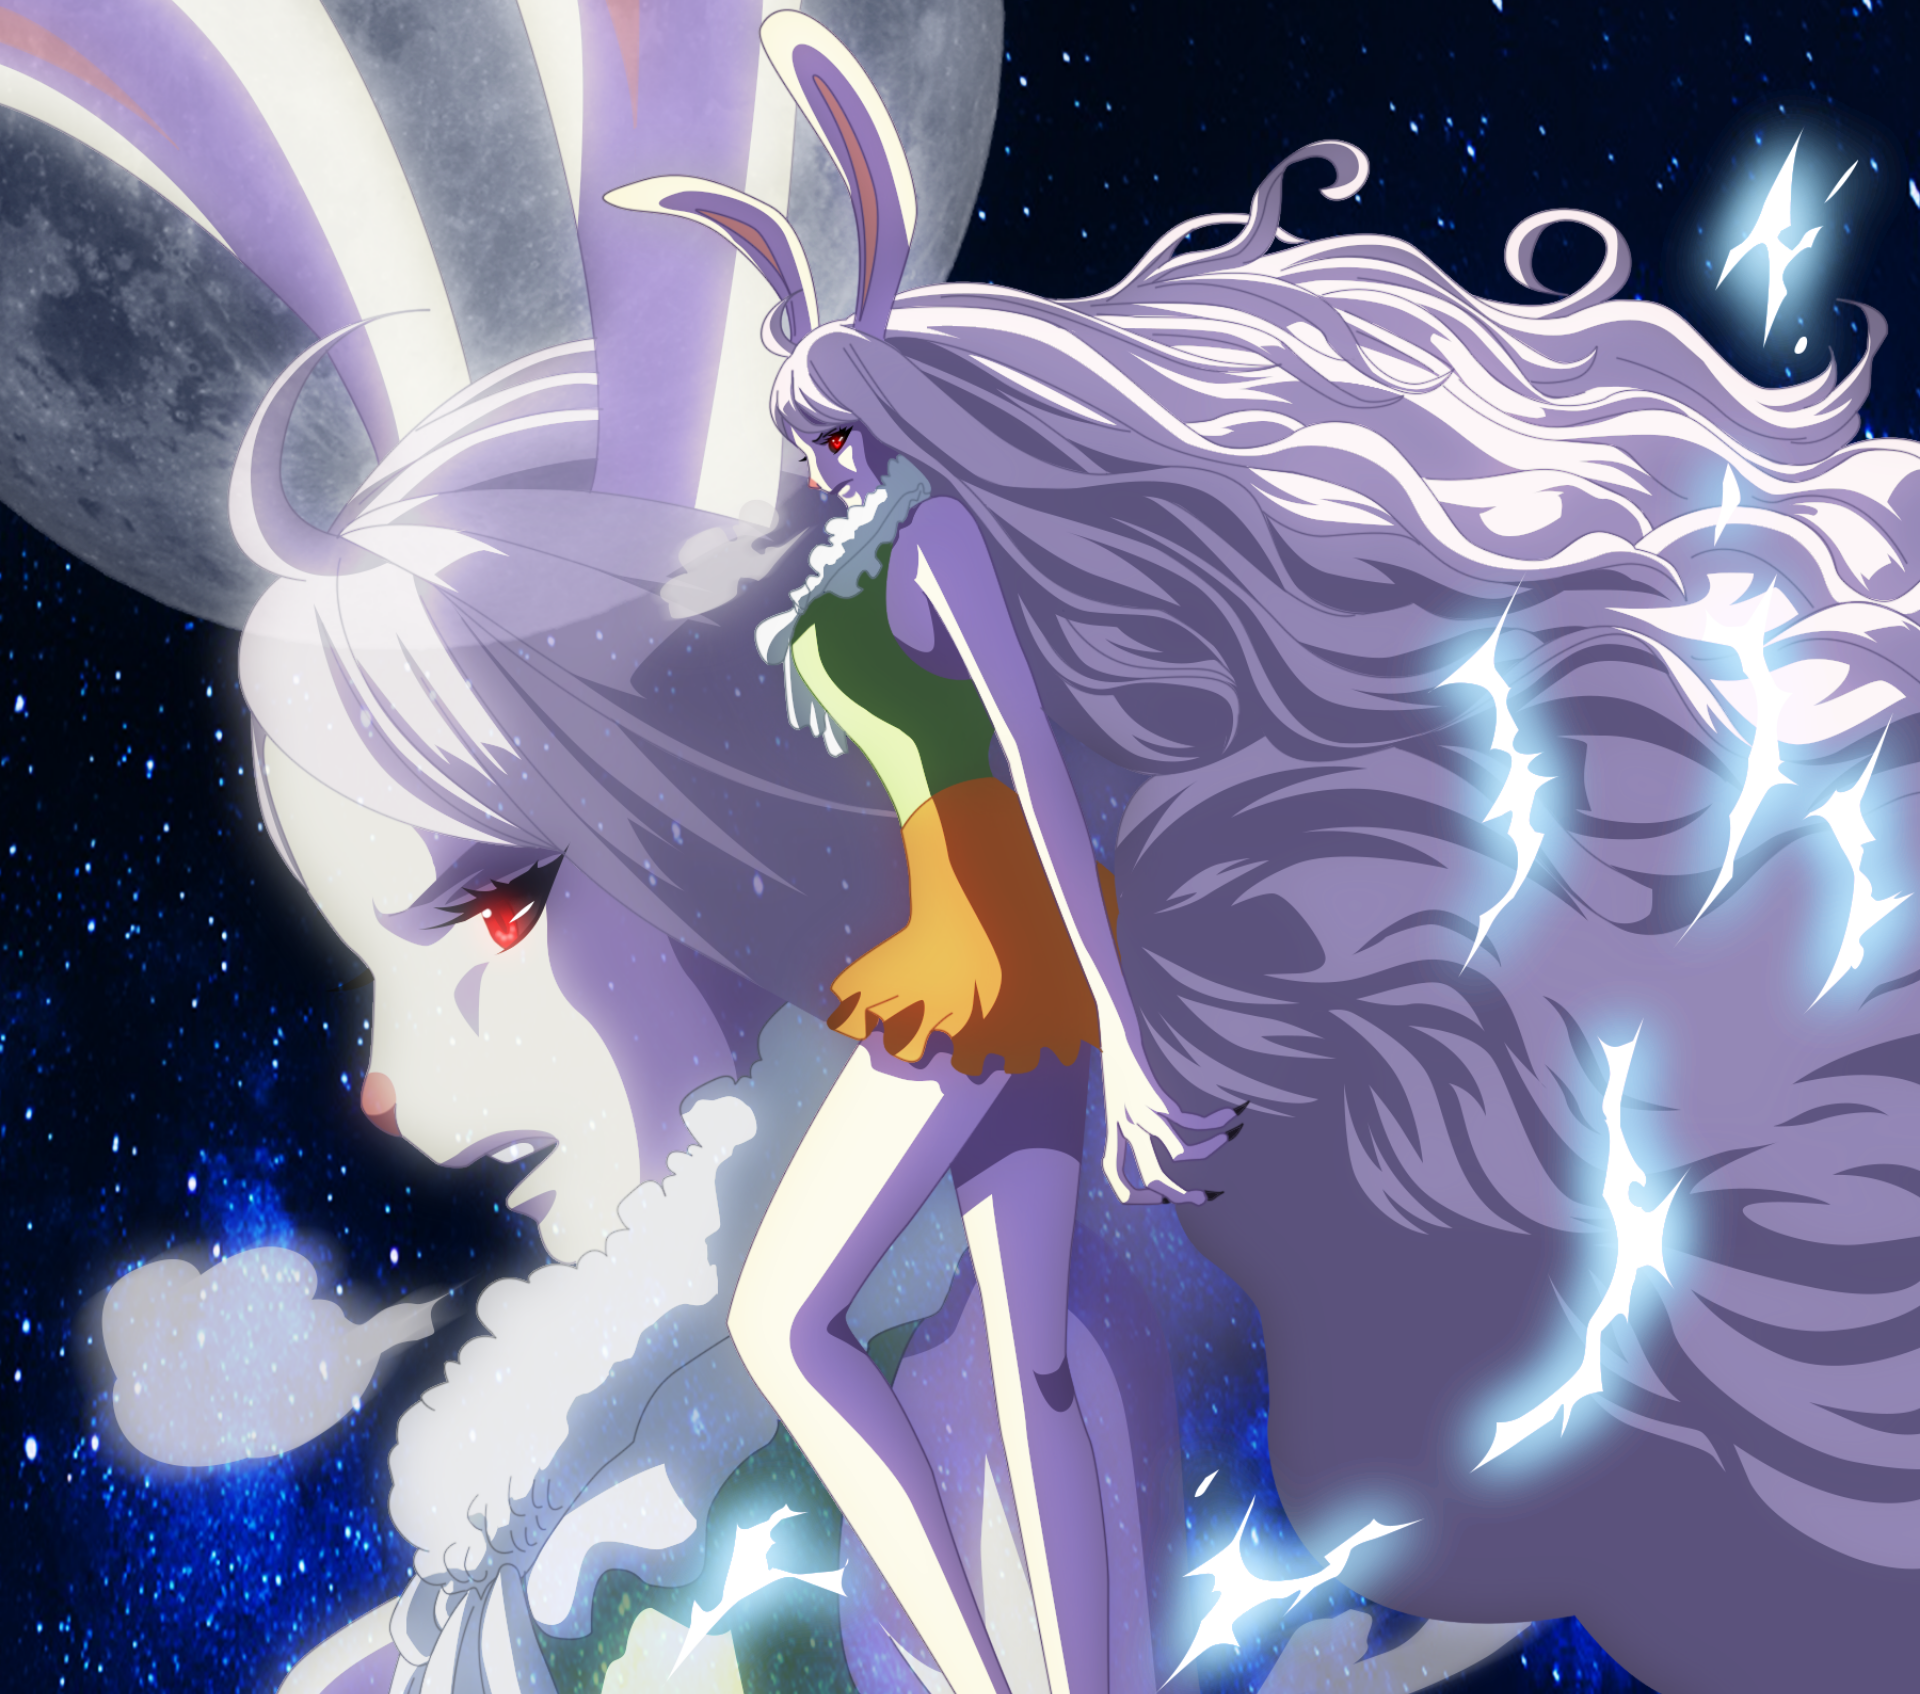 Carrot (One Piece) HD Wallpapers and Backgrounds. 